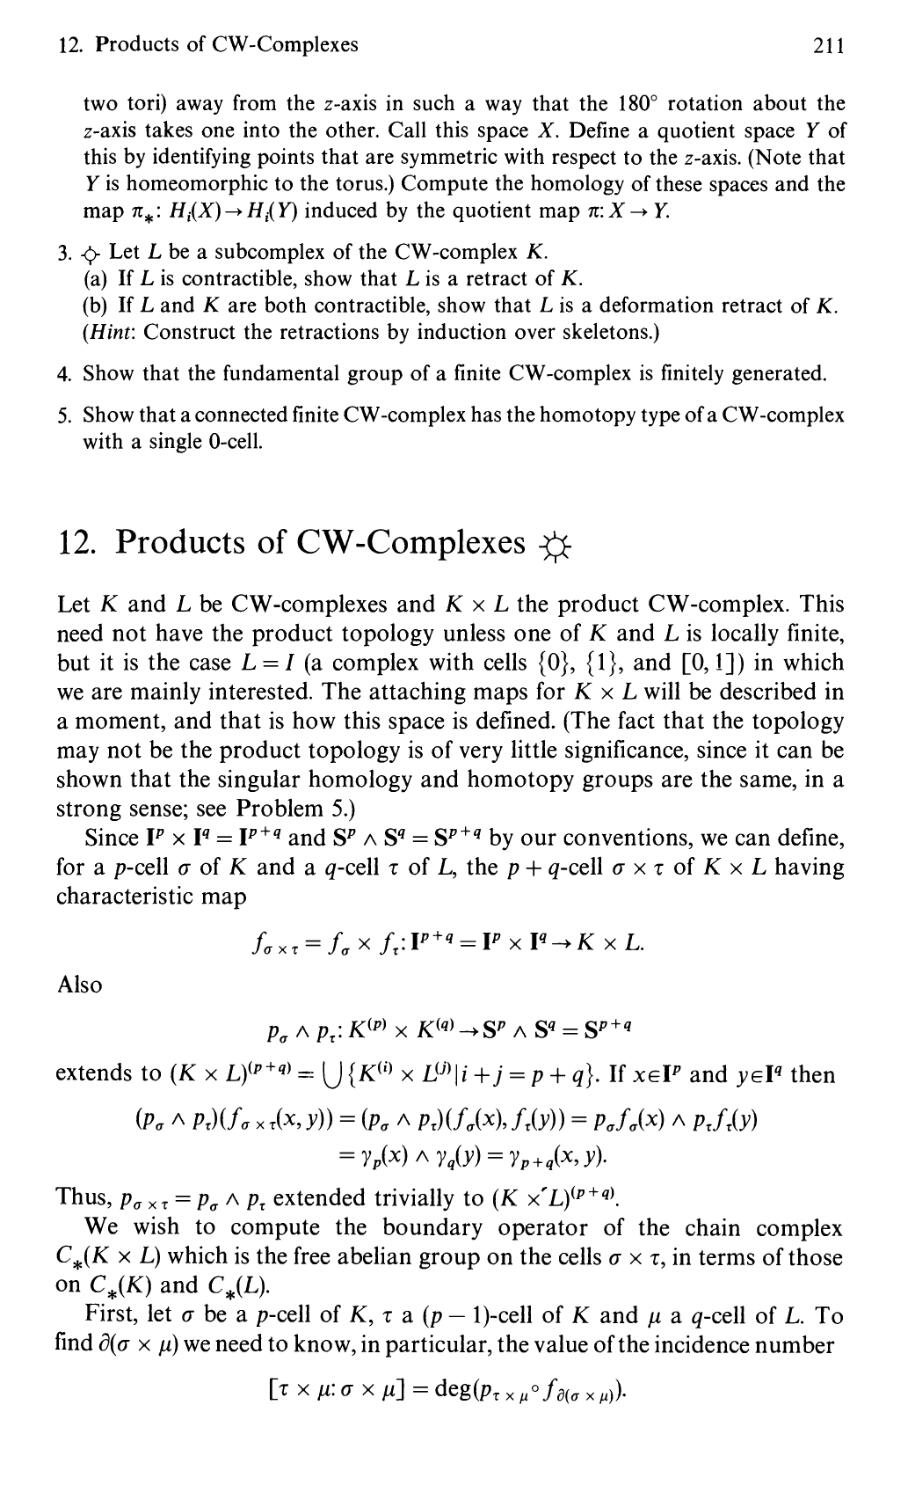 12. Products of CW-Complexes